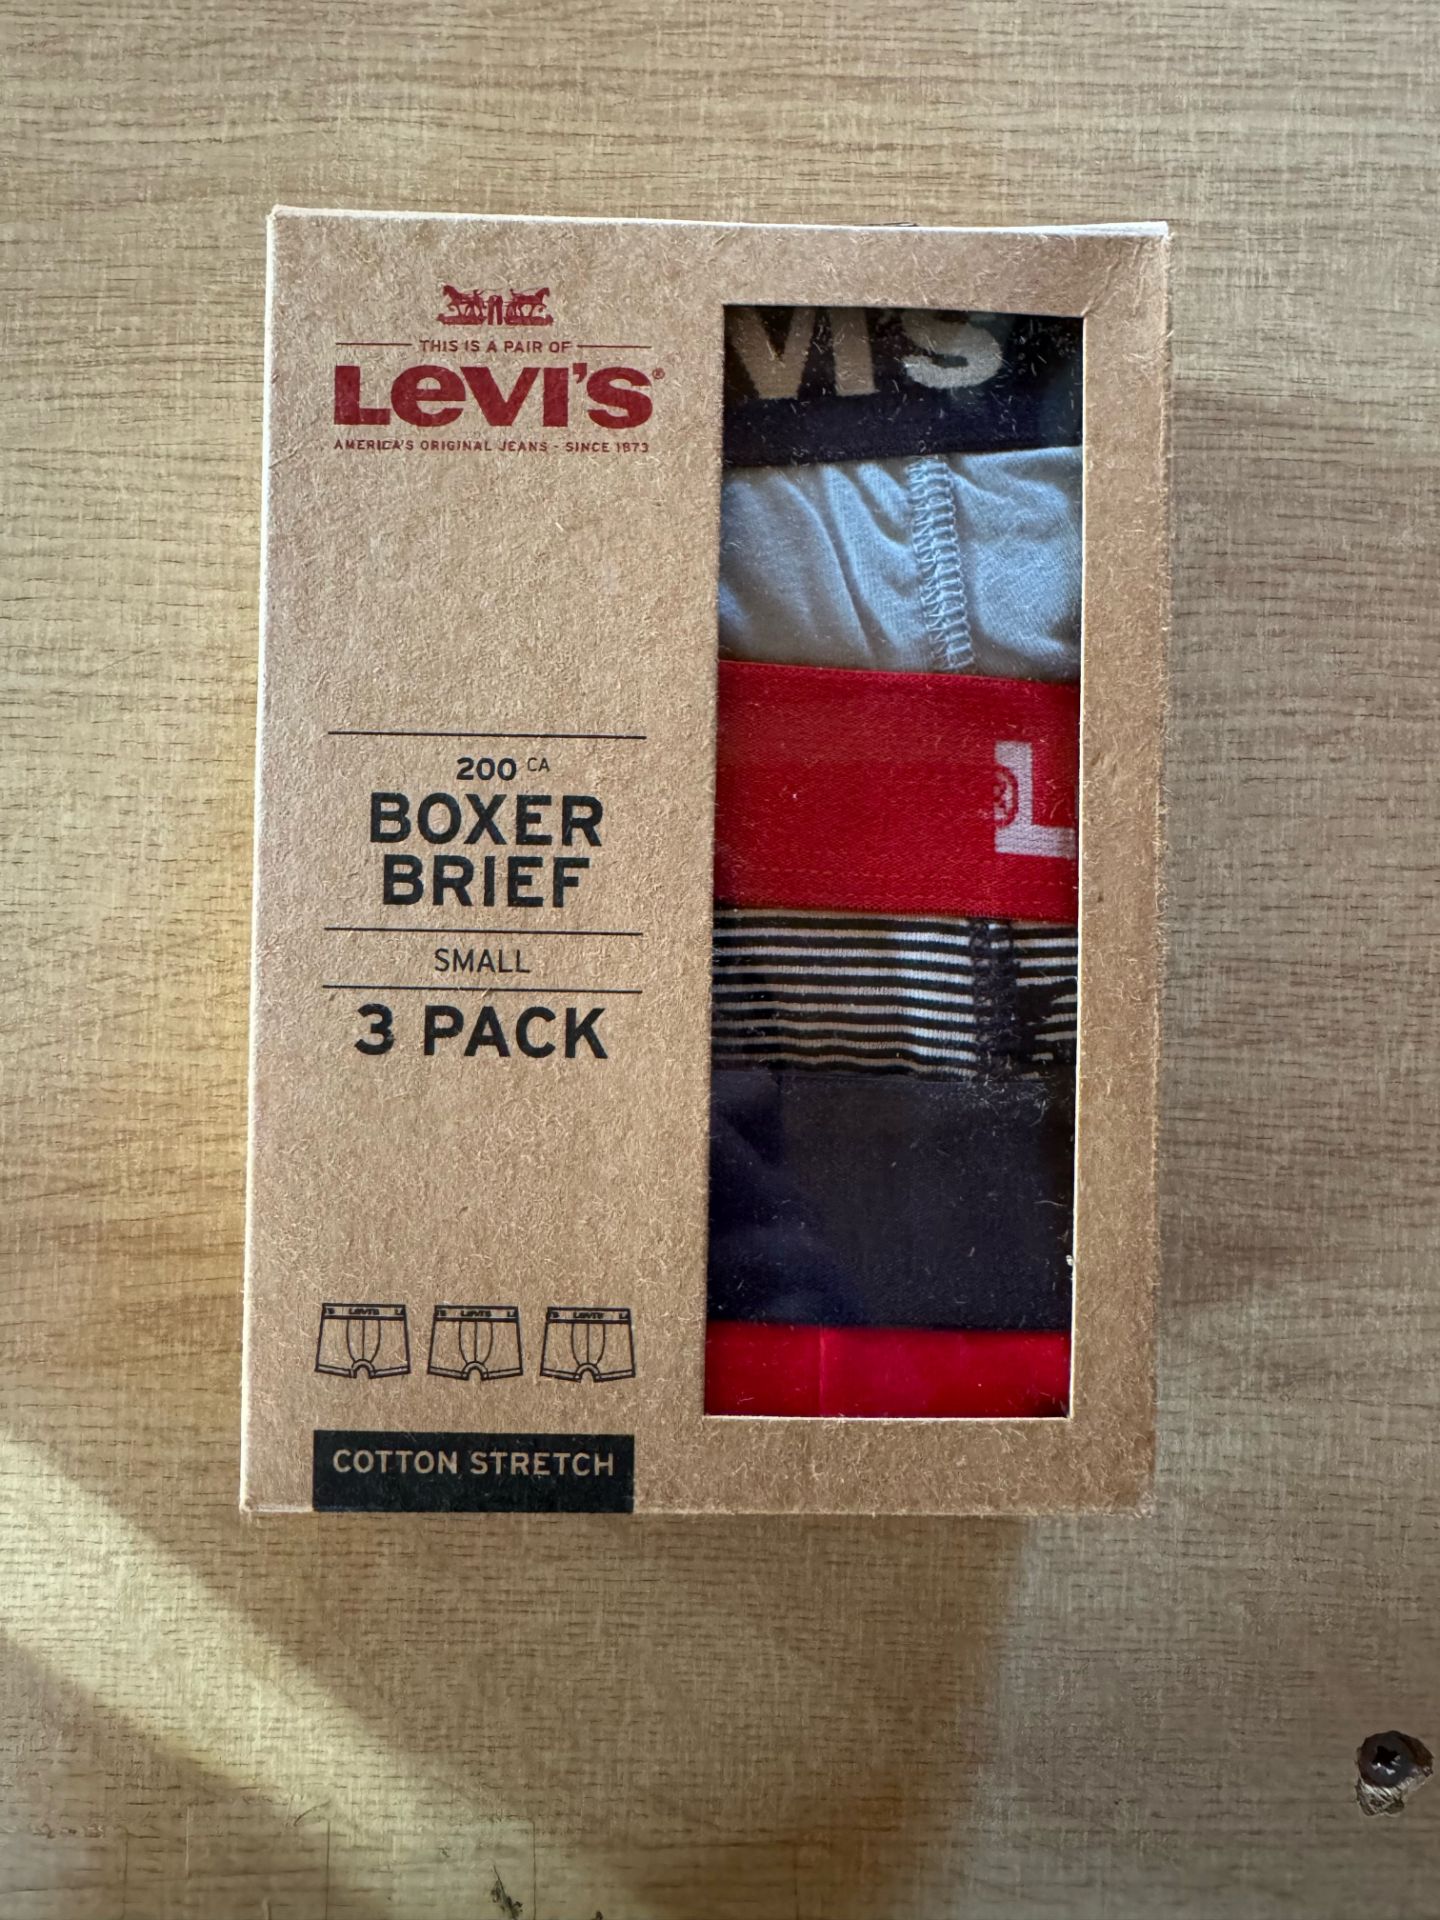 1 x Levi's 200CA Boxer Briefs 3 Pack Palmtree Print Red/Blue Size Small Original Box - Image 2 of 2